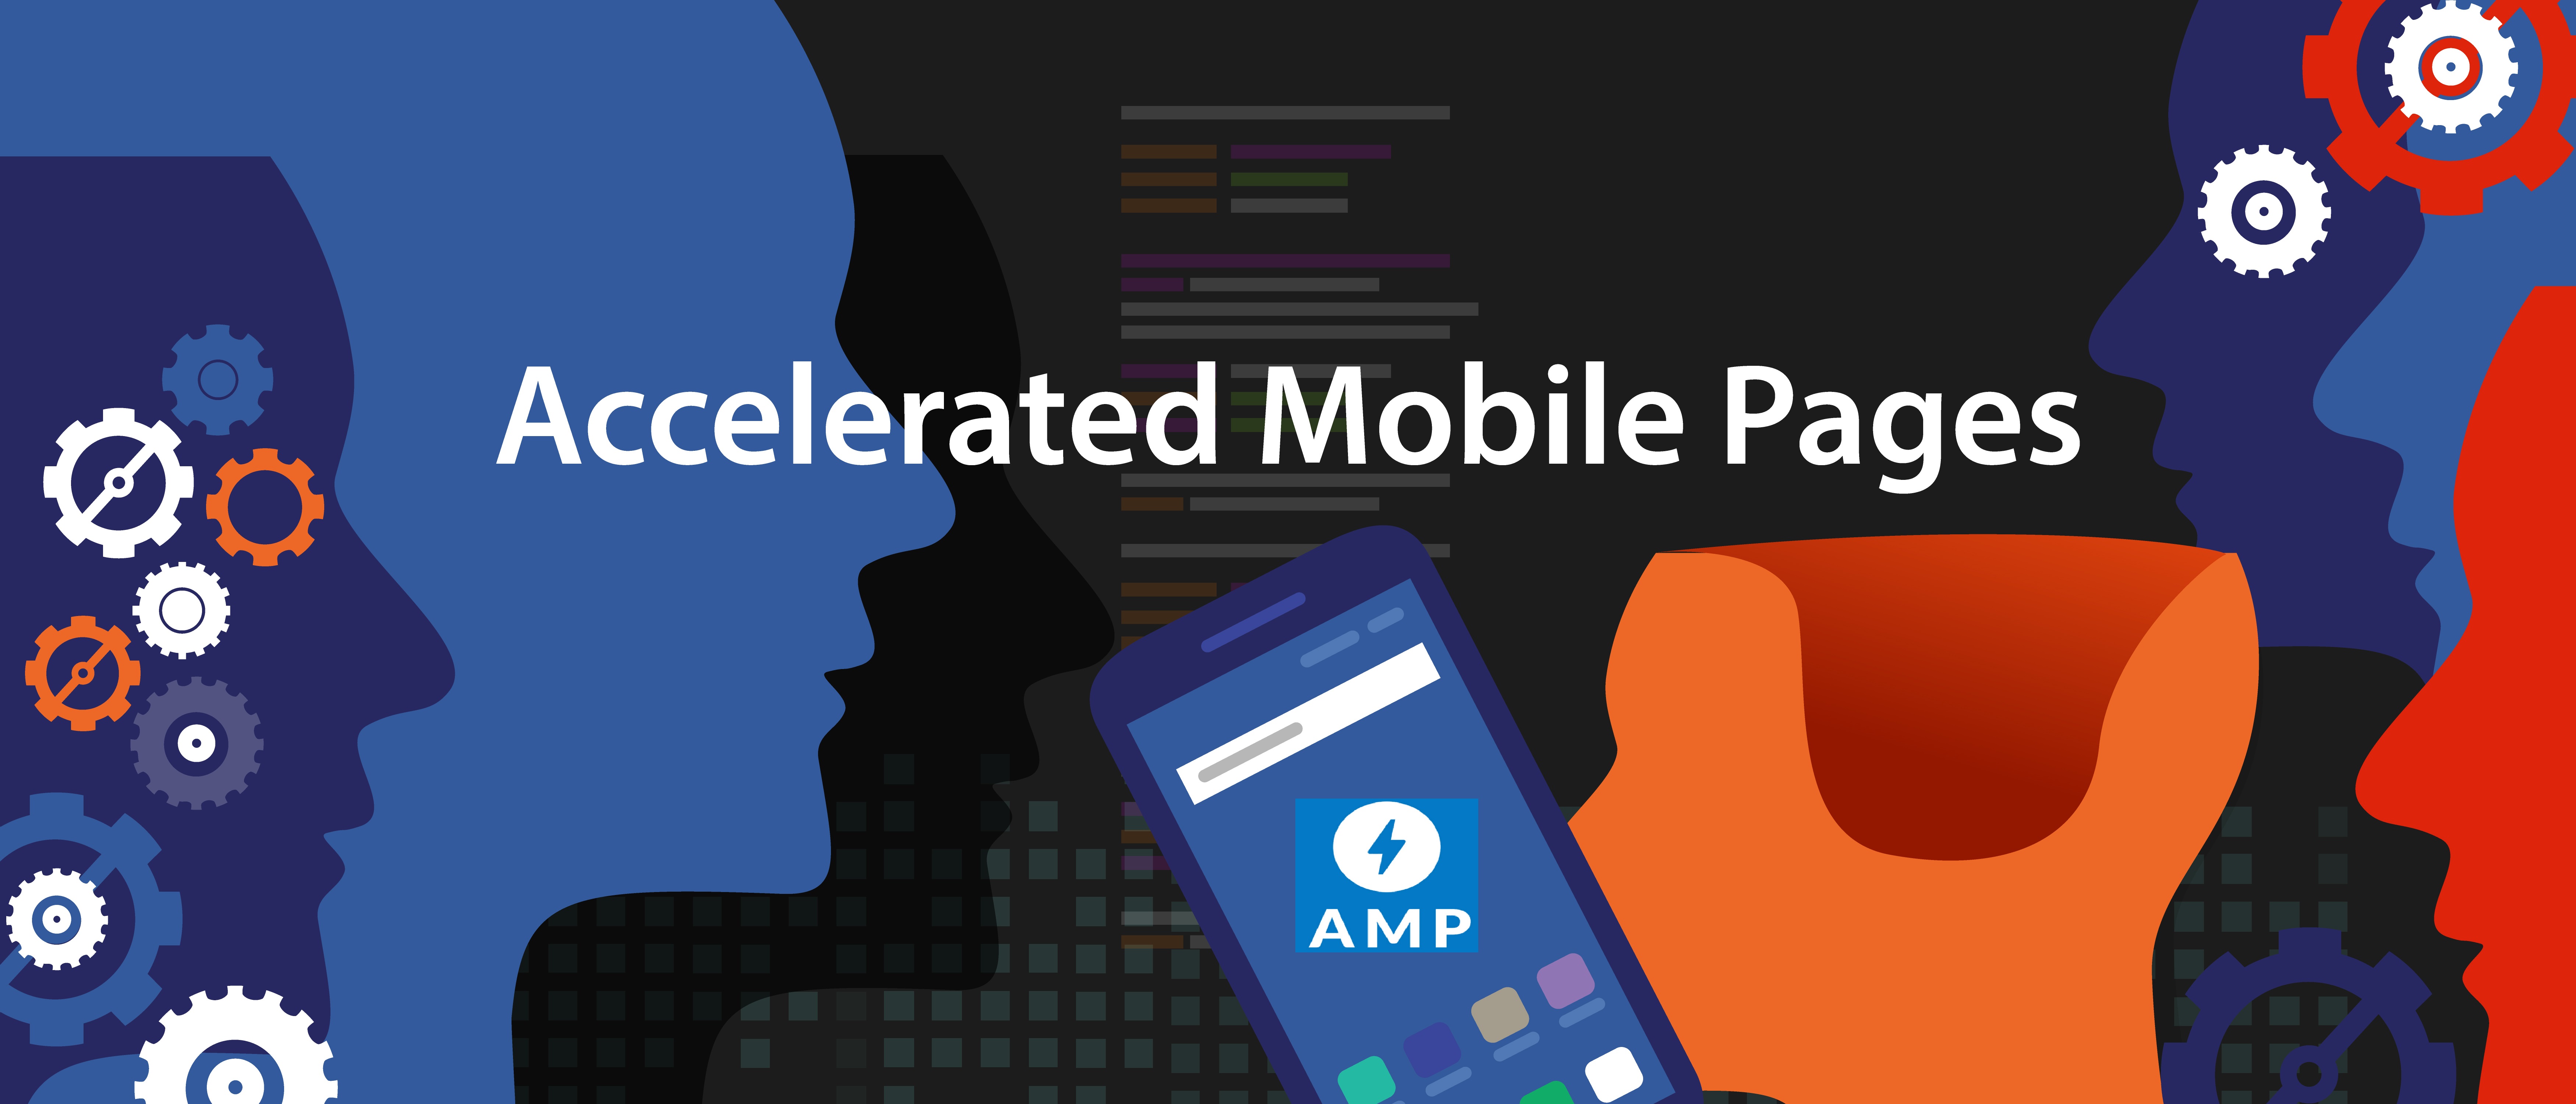 Implementing AMP (Accelerated Mobile Pages) for mobile SEO optimization